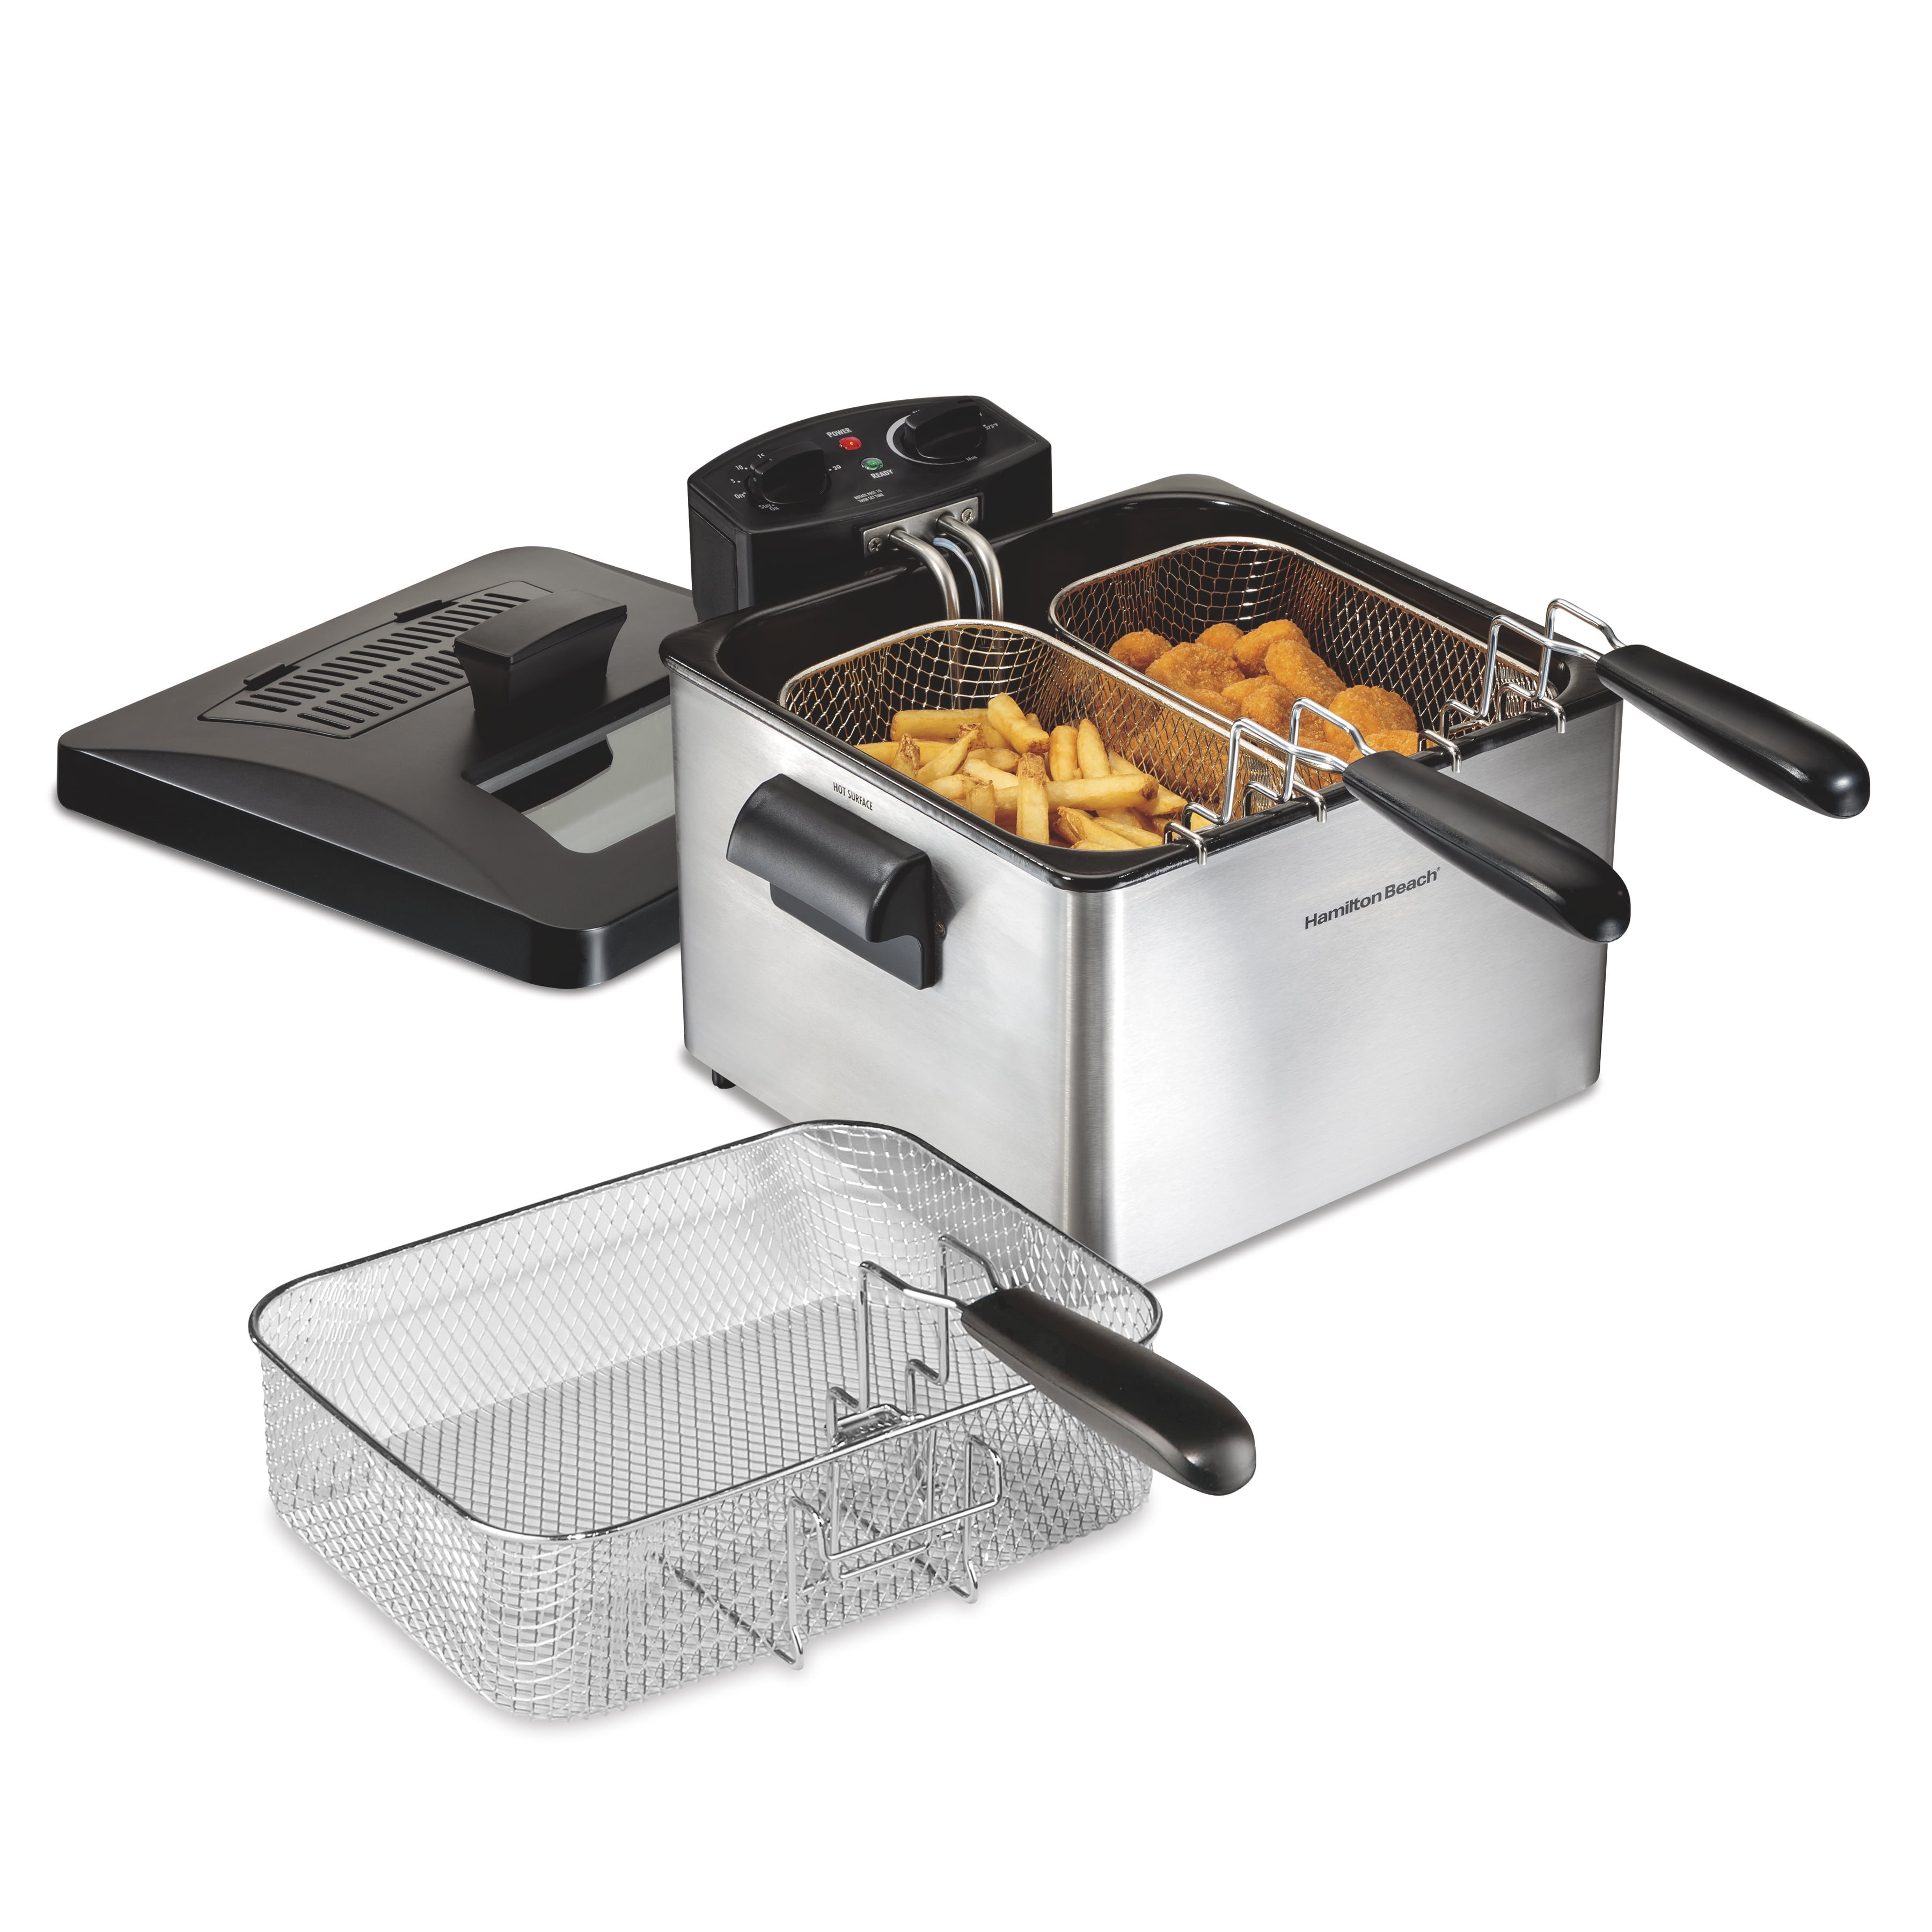 Hamilton Beach Professional-Style Deep Fryer with 3 Frying Baskets, 4.7  Quart or 19 Cup Oil Capacity, Lid with View Window, Stainless Steel, 35034